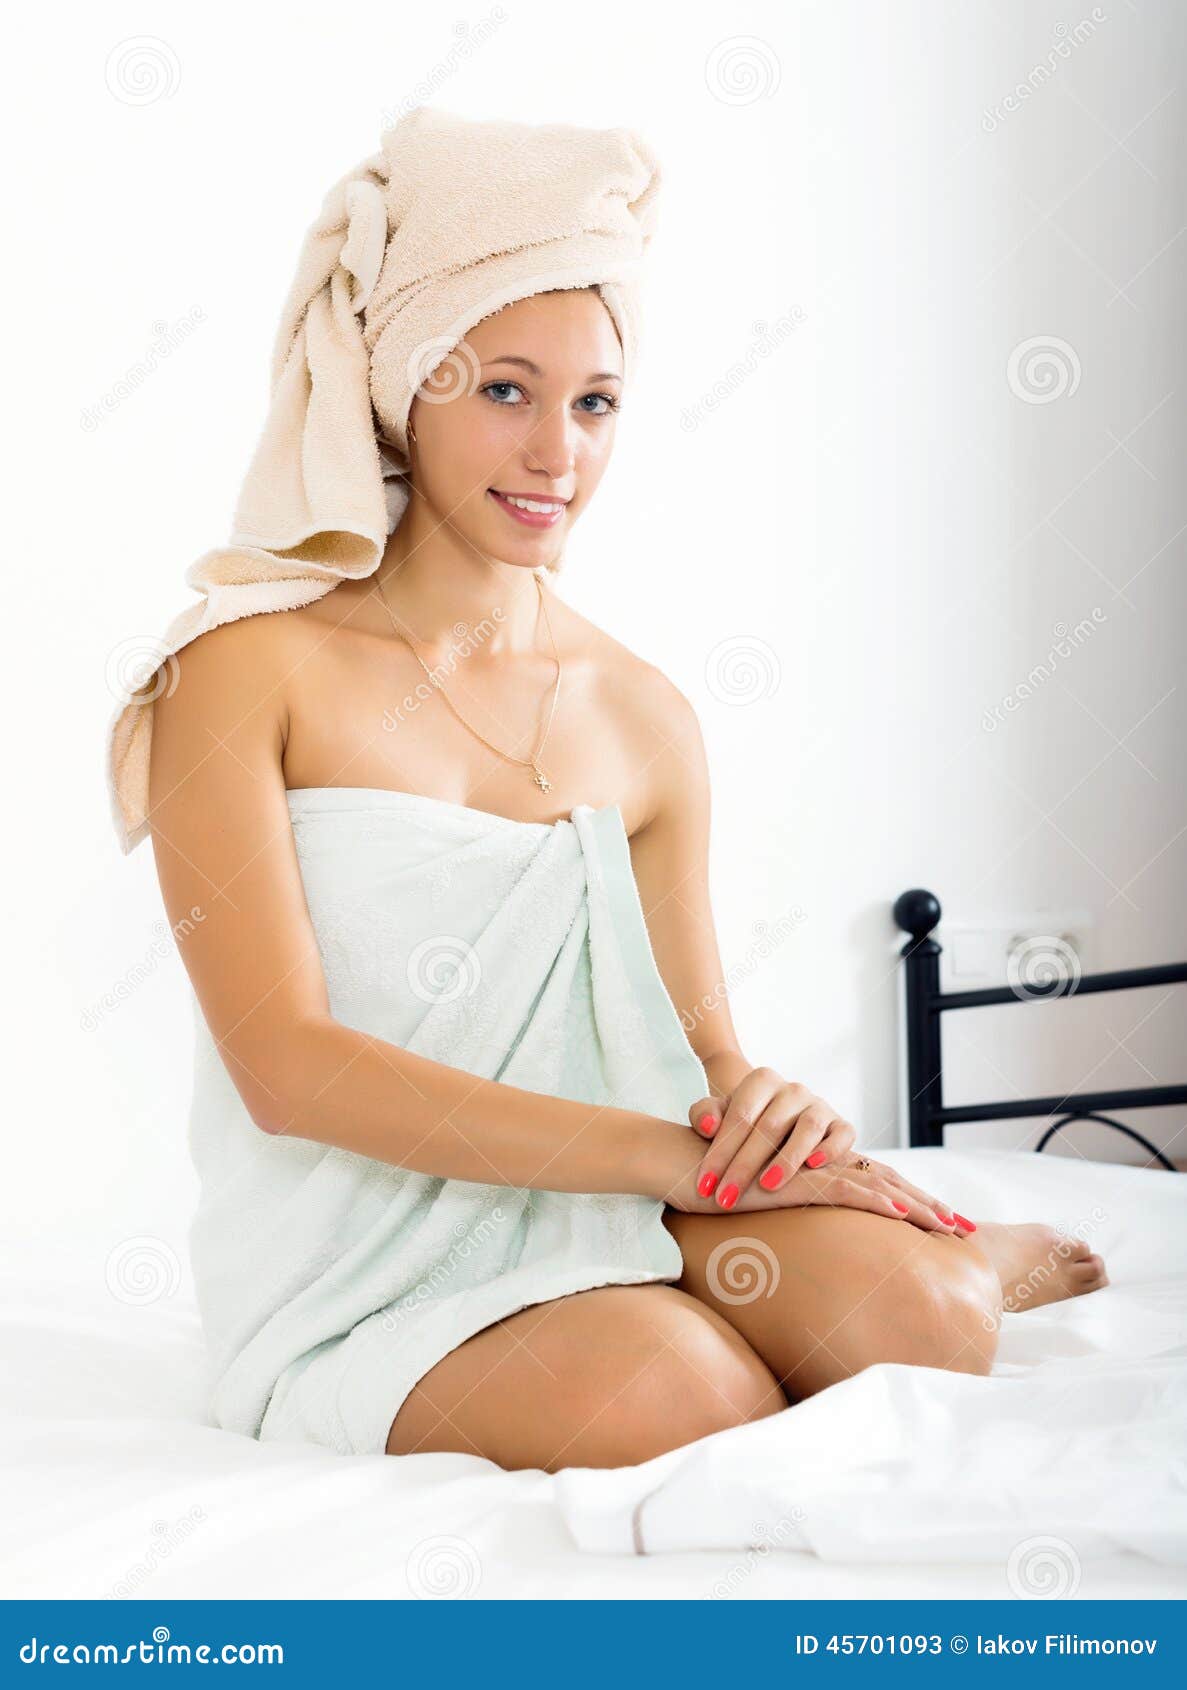 Girl After Shower In Towel Stock Image